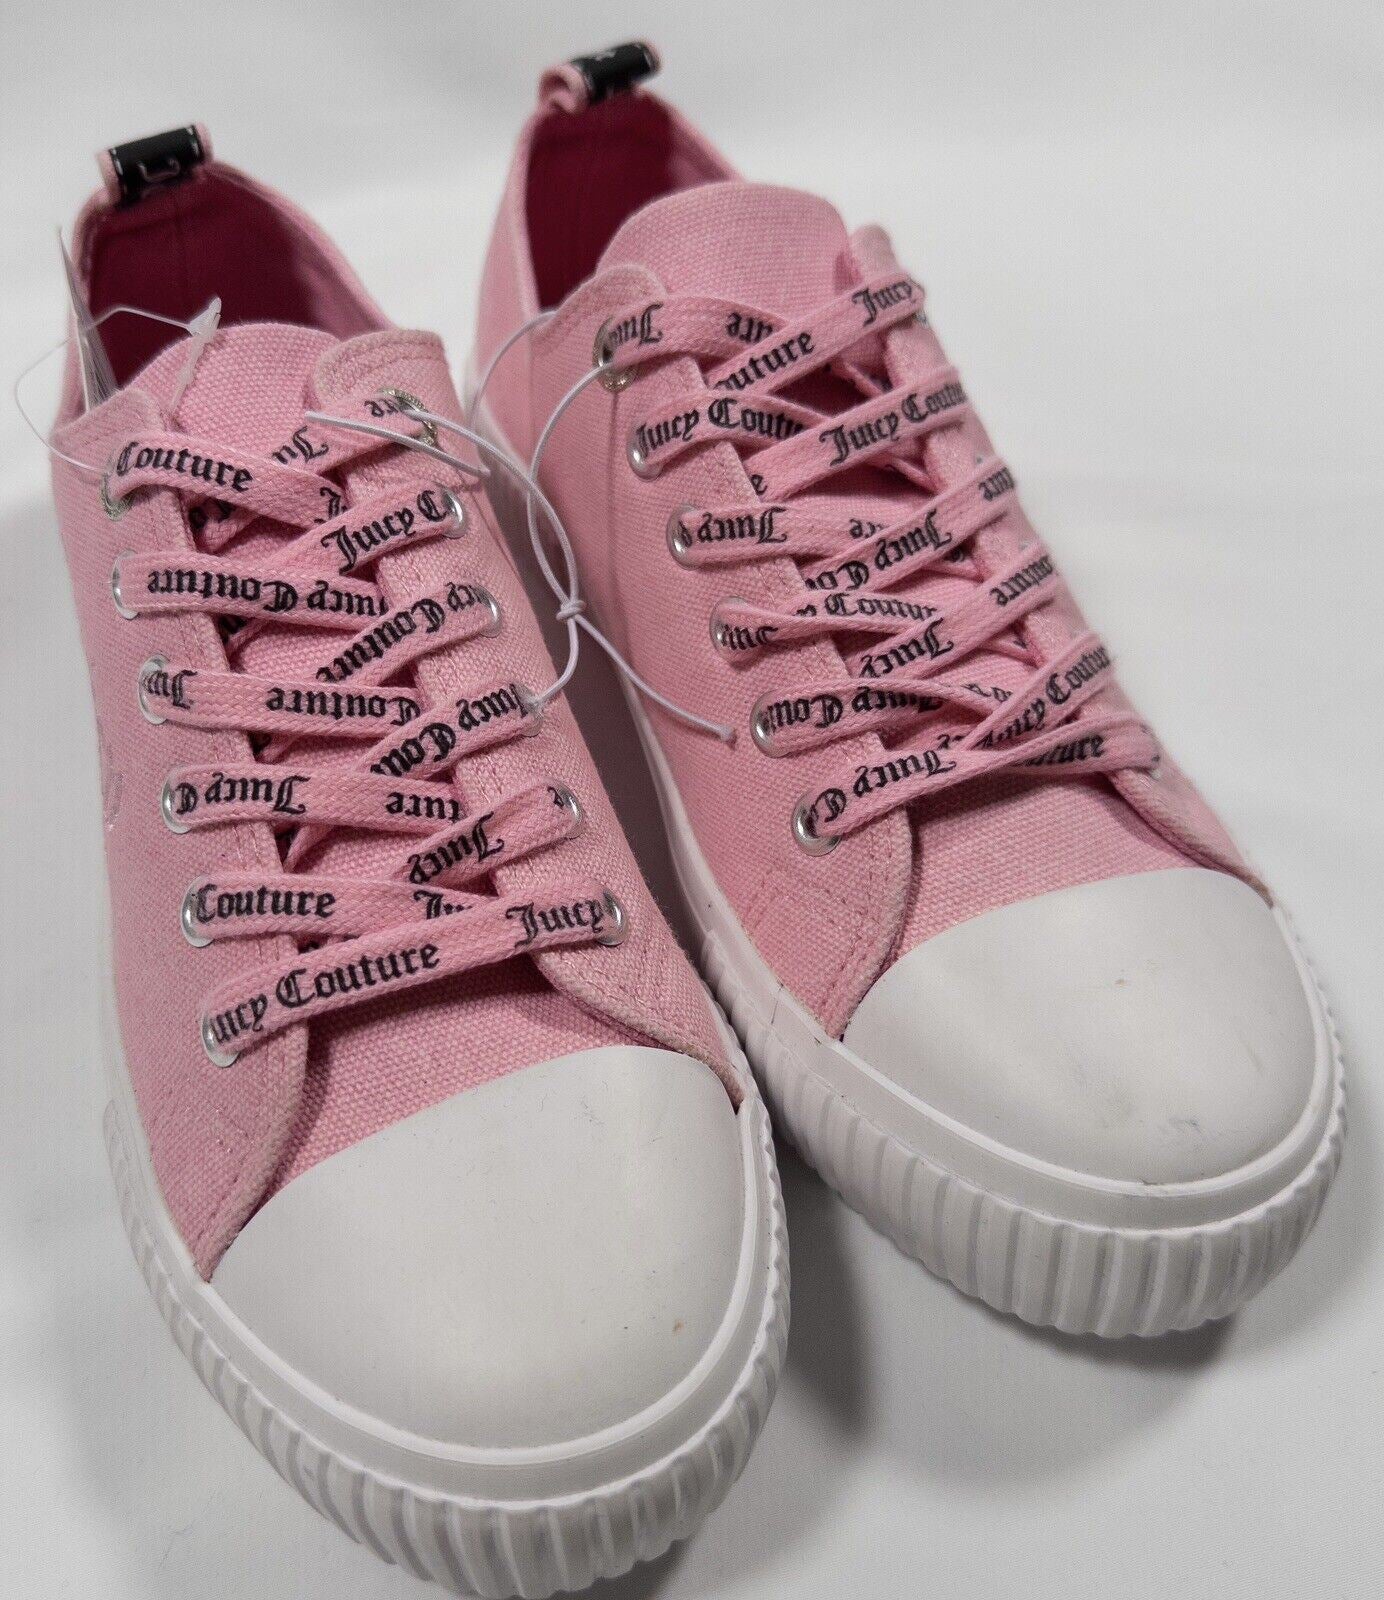 Juicy Couture Women's Pink Trainers Shoes Size UK 5